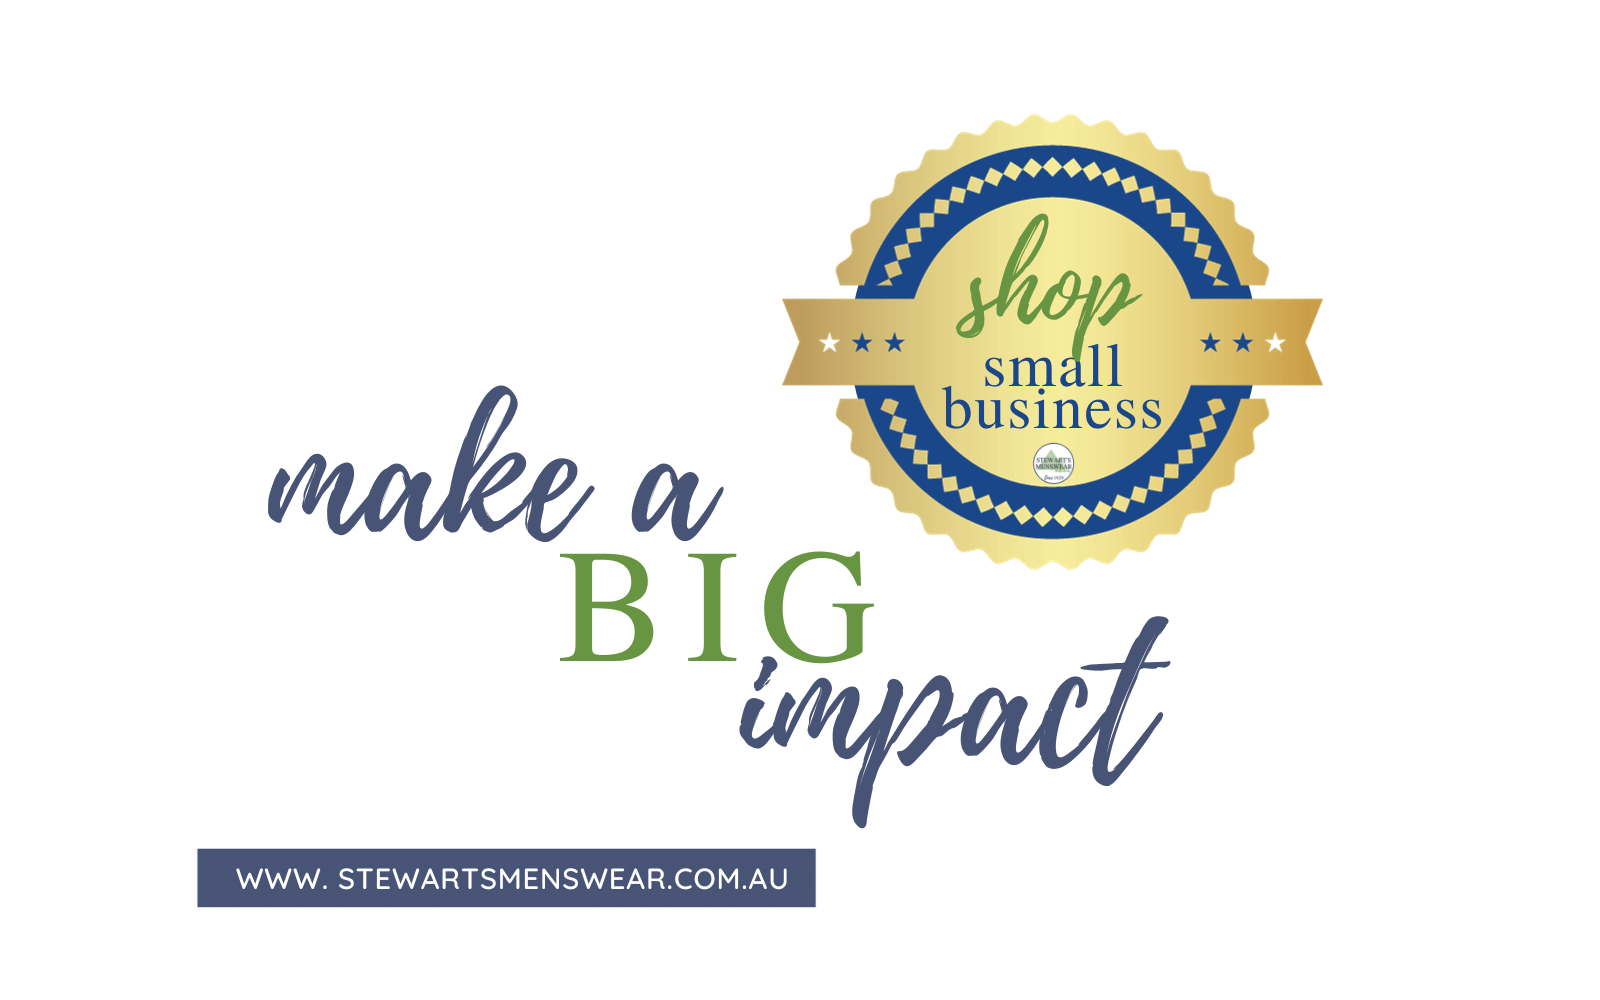 Shop Small Business trust badge with the words "Make a big impact"